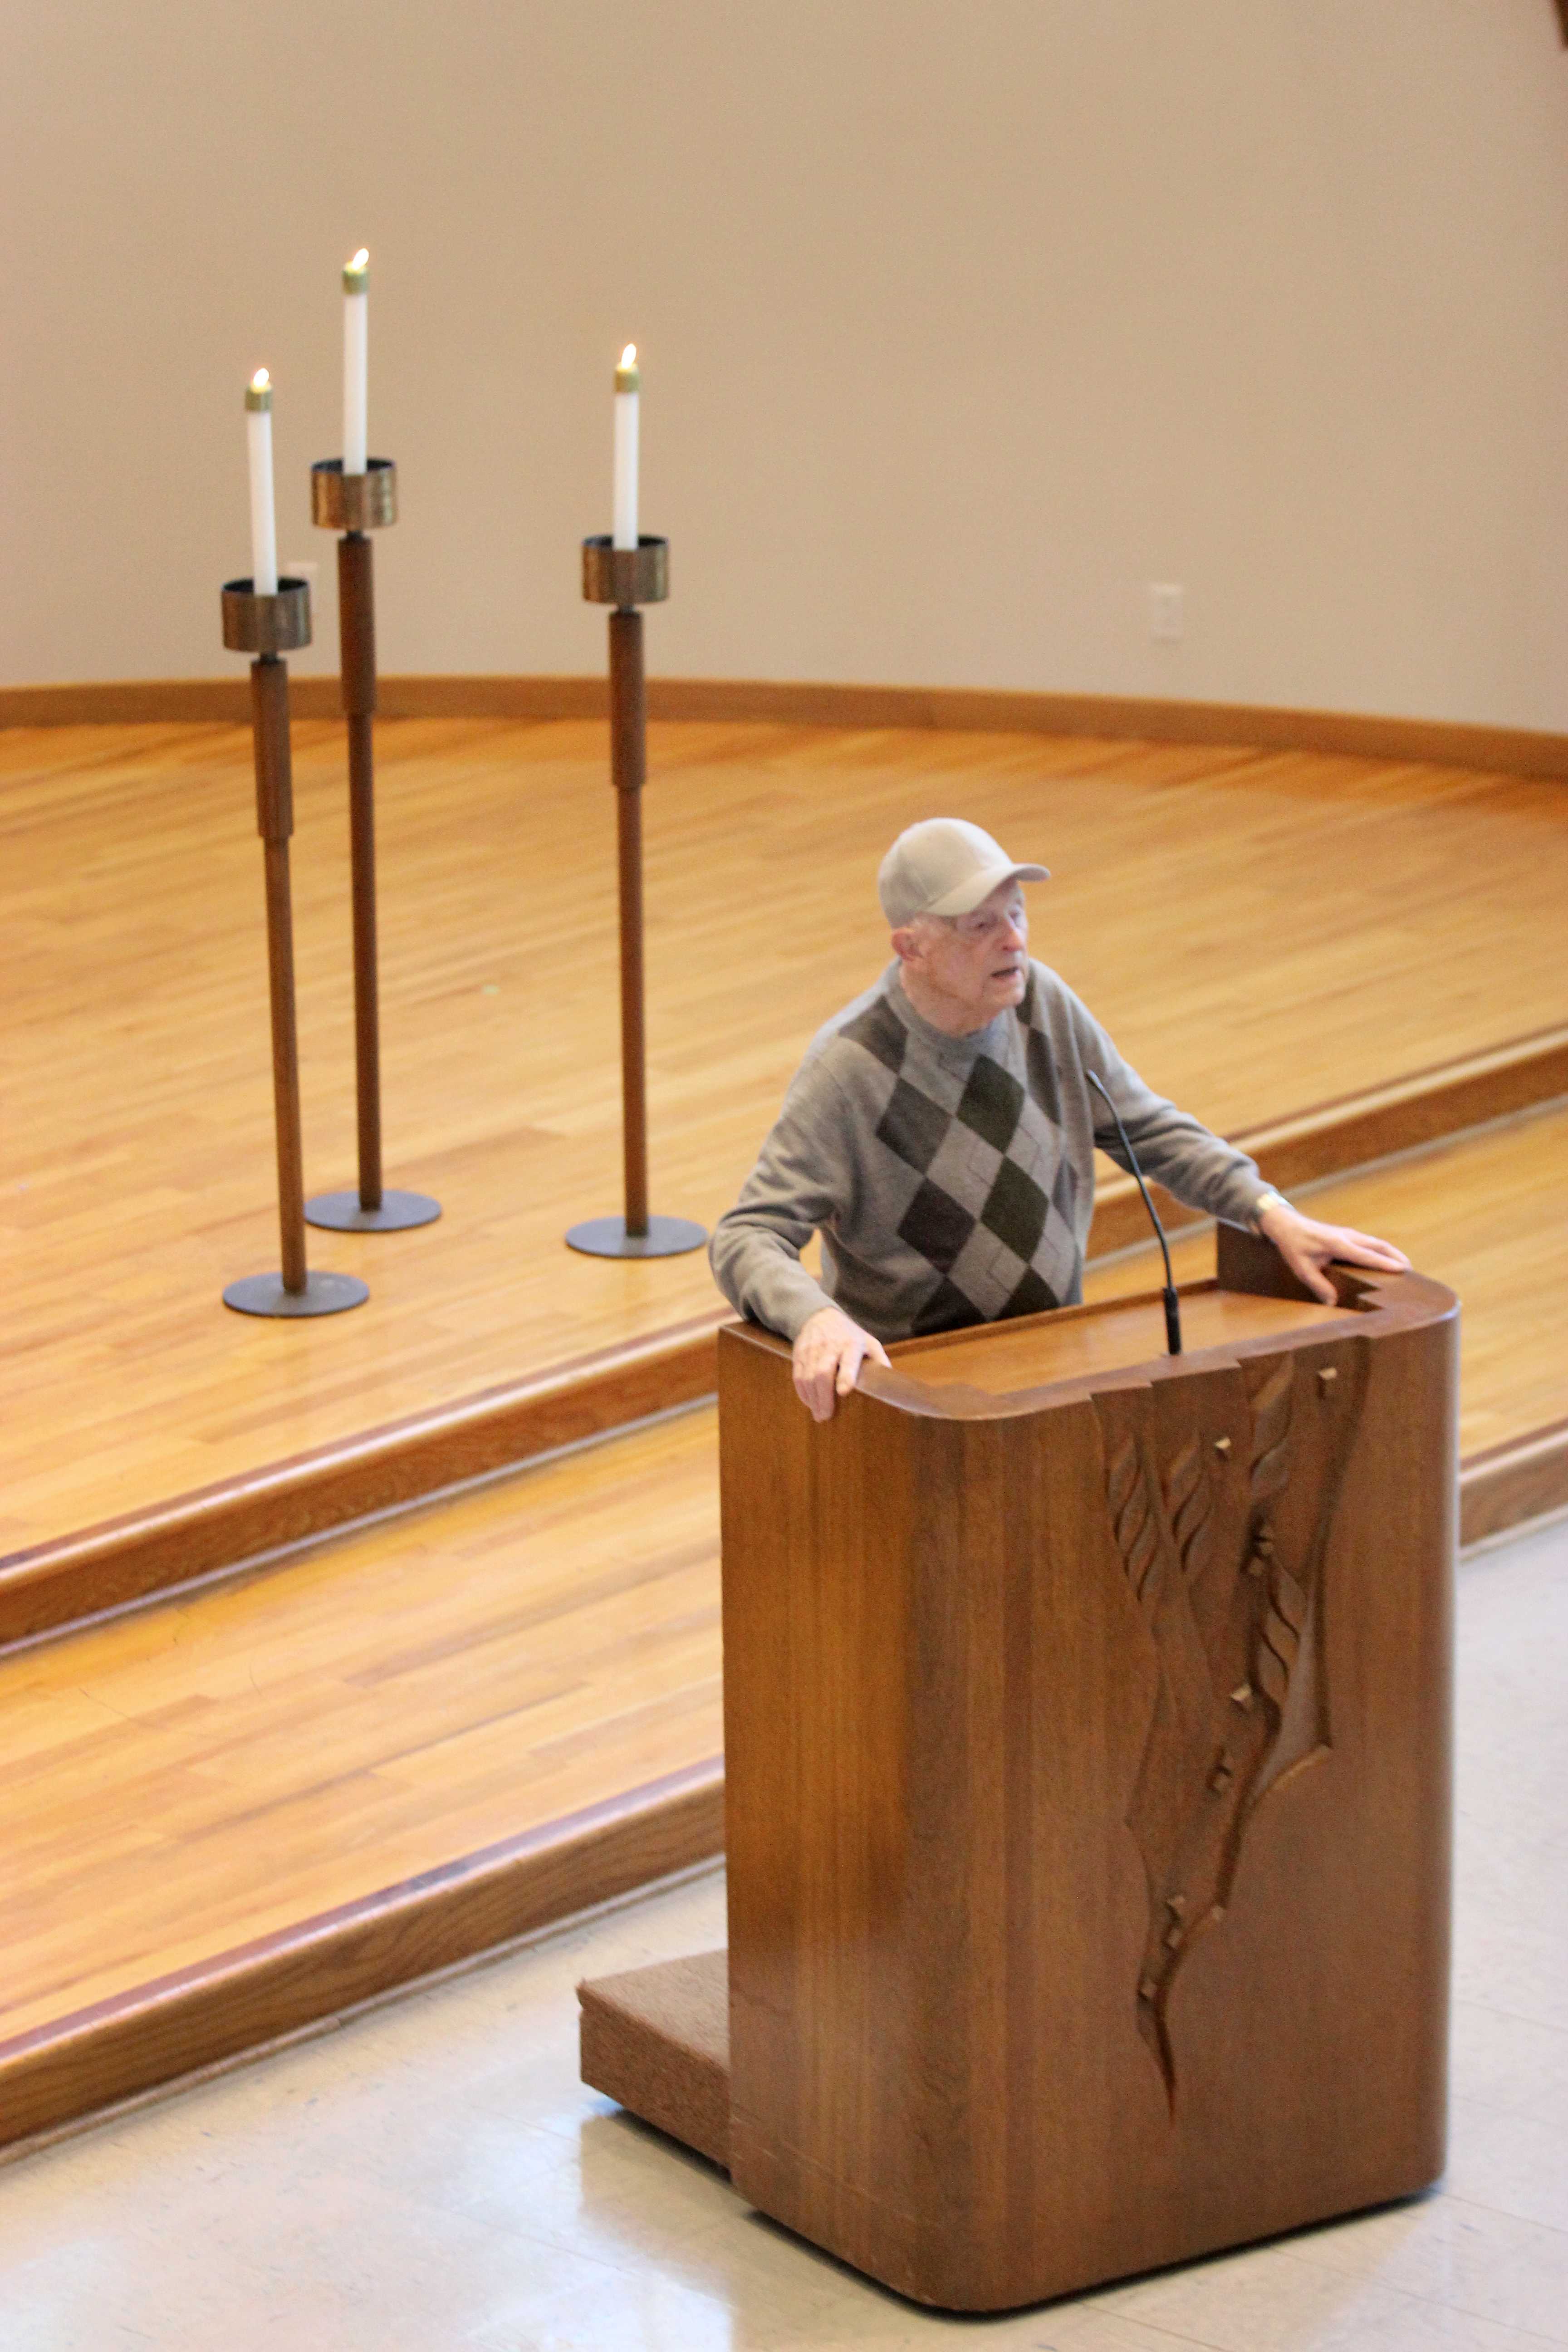 Holocaust survivor Michael Mark, 91 years old, spoke in the University Chapel on Yom HaShoah (Holocaust Remembrance Day) to speak about his experience. Photo by Amanda Marston - Staff Photographer